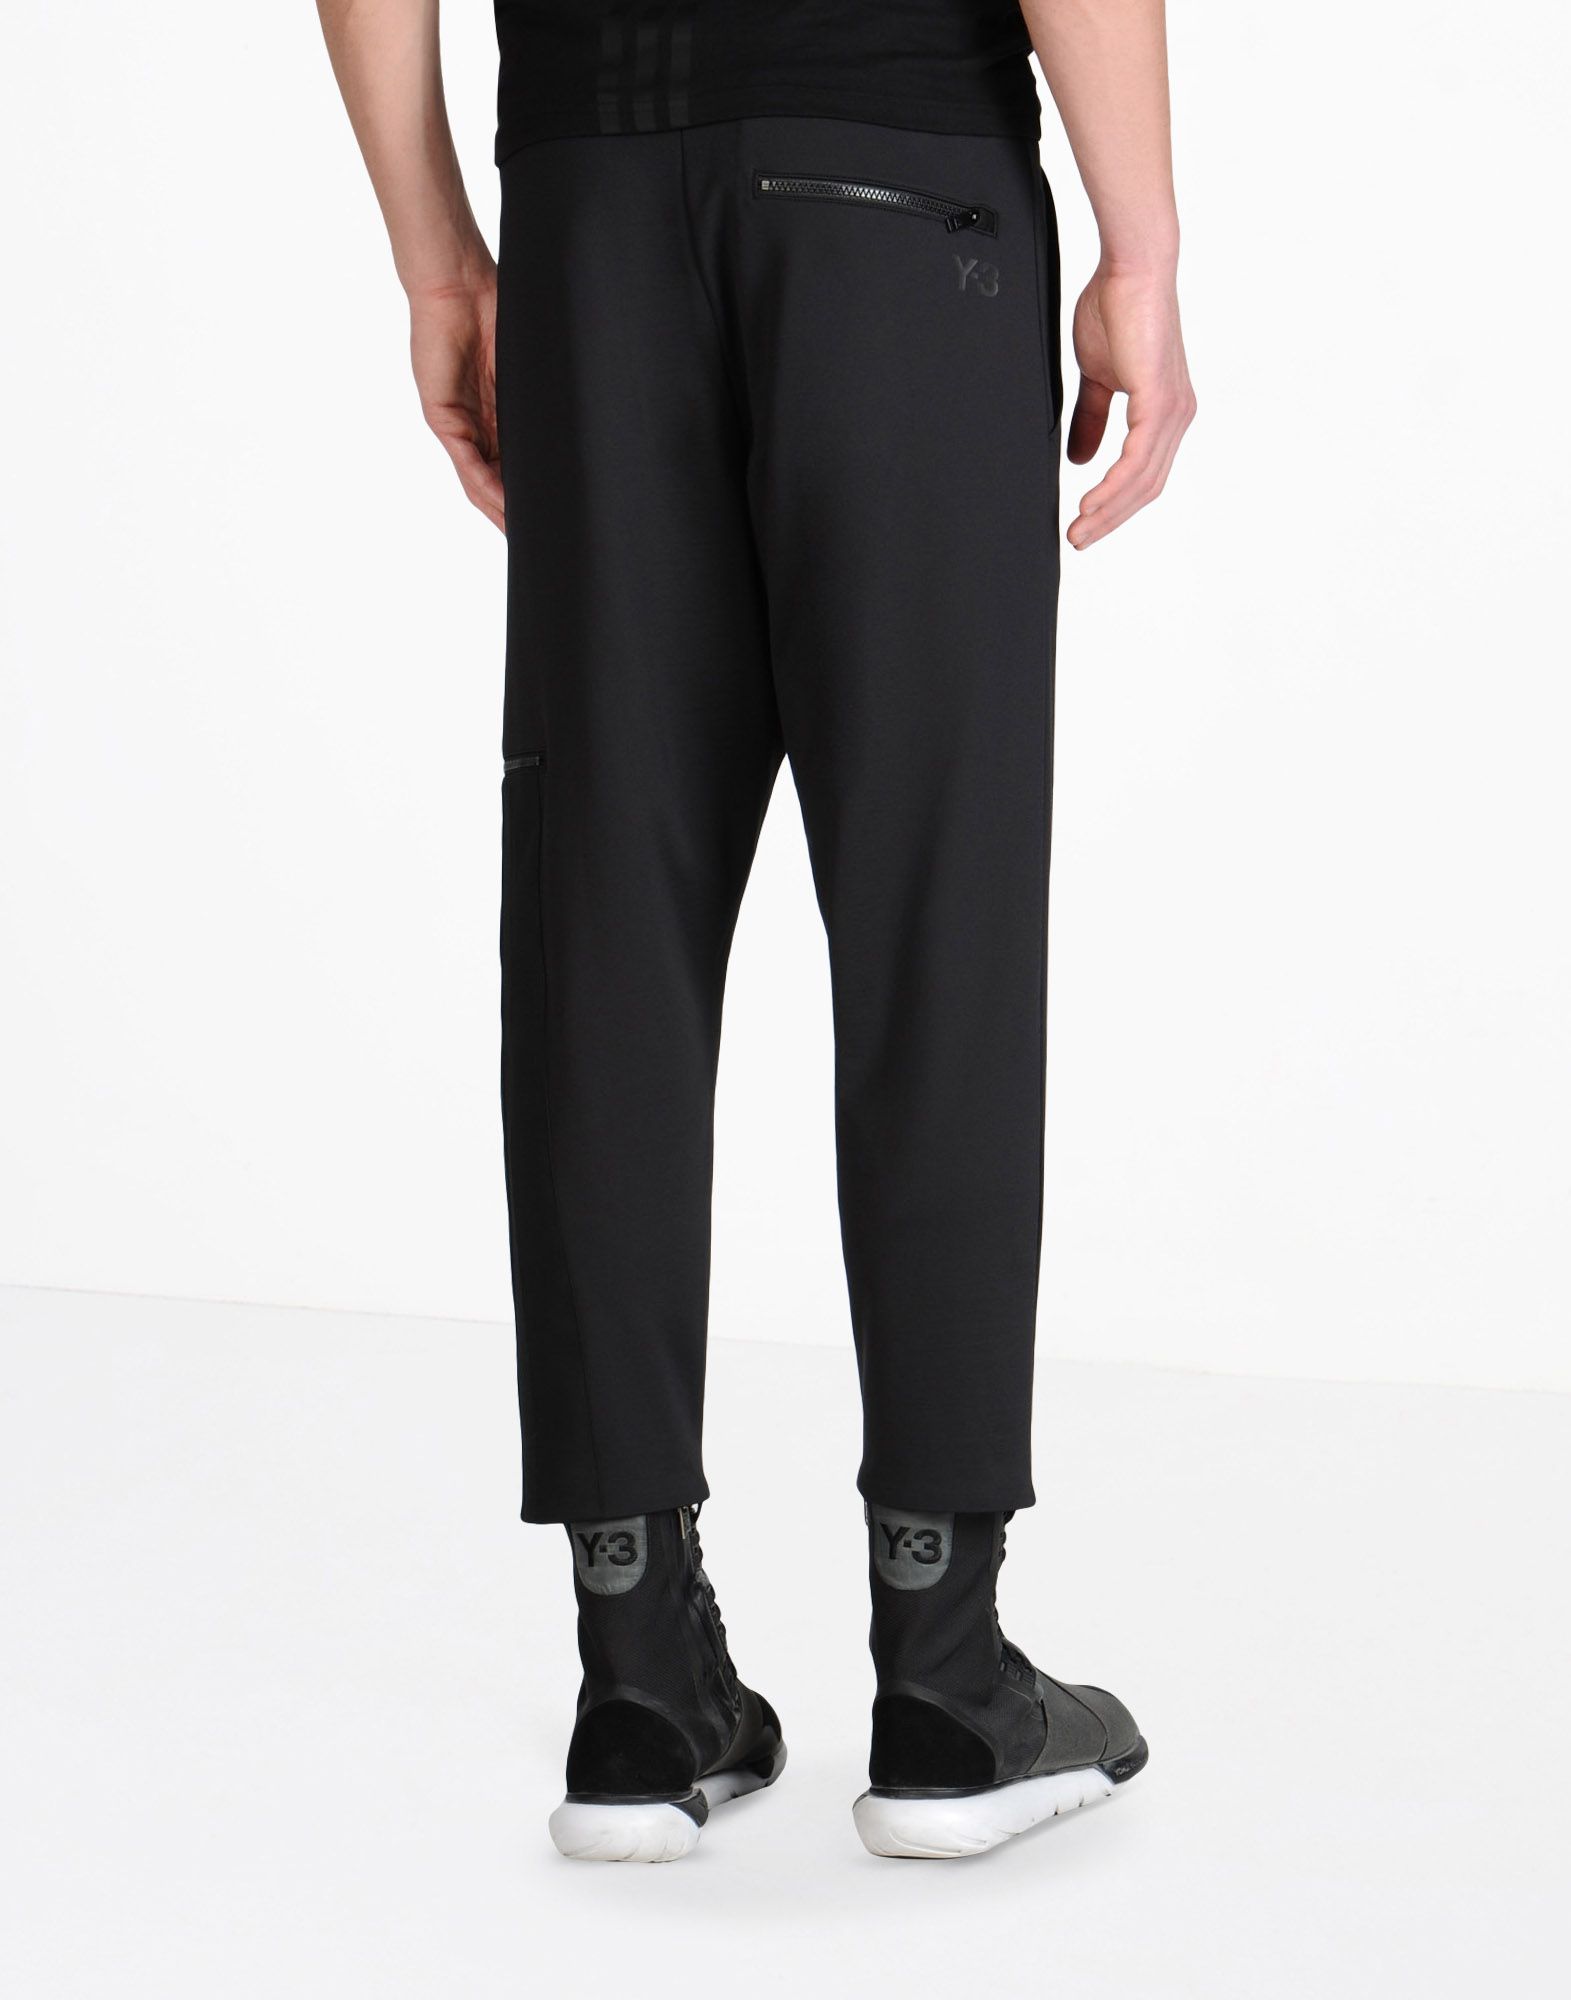 Y 3 LUX FT PURE PANT for Men | Adidas Y-3 Official Store